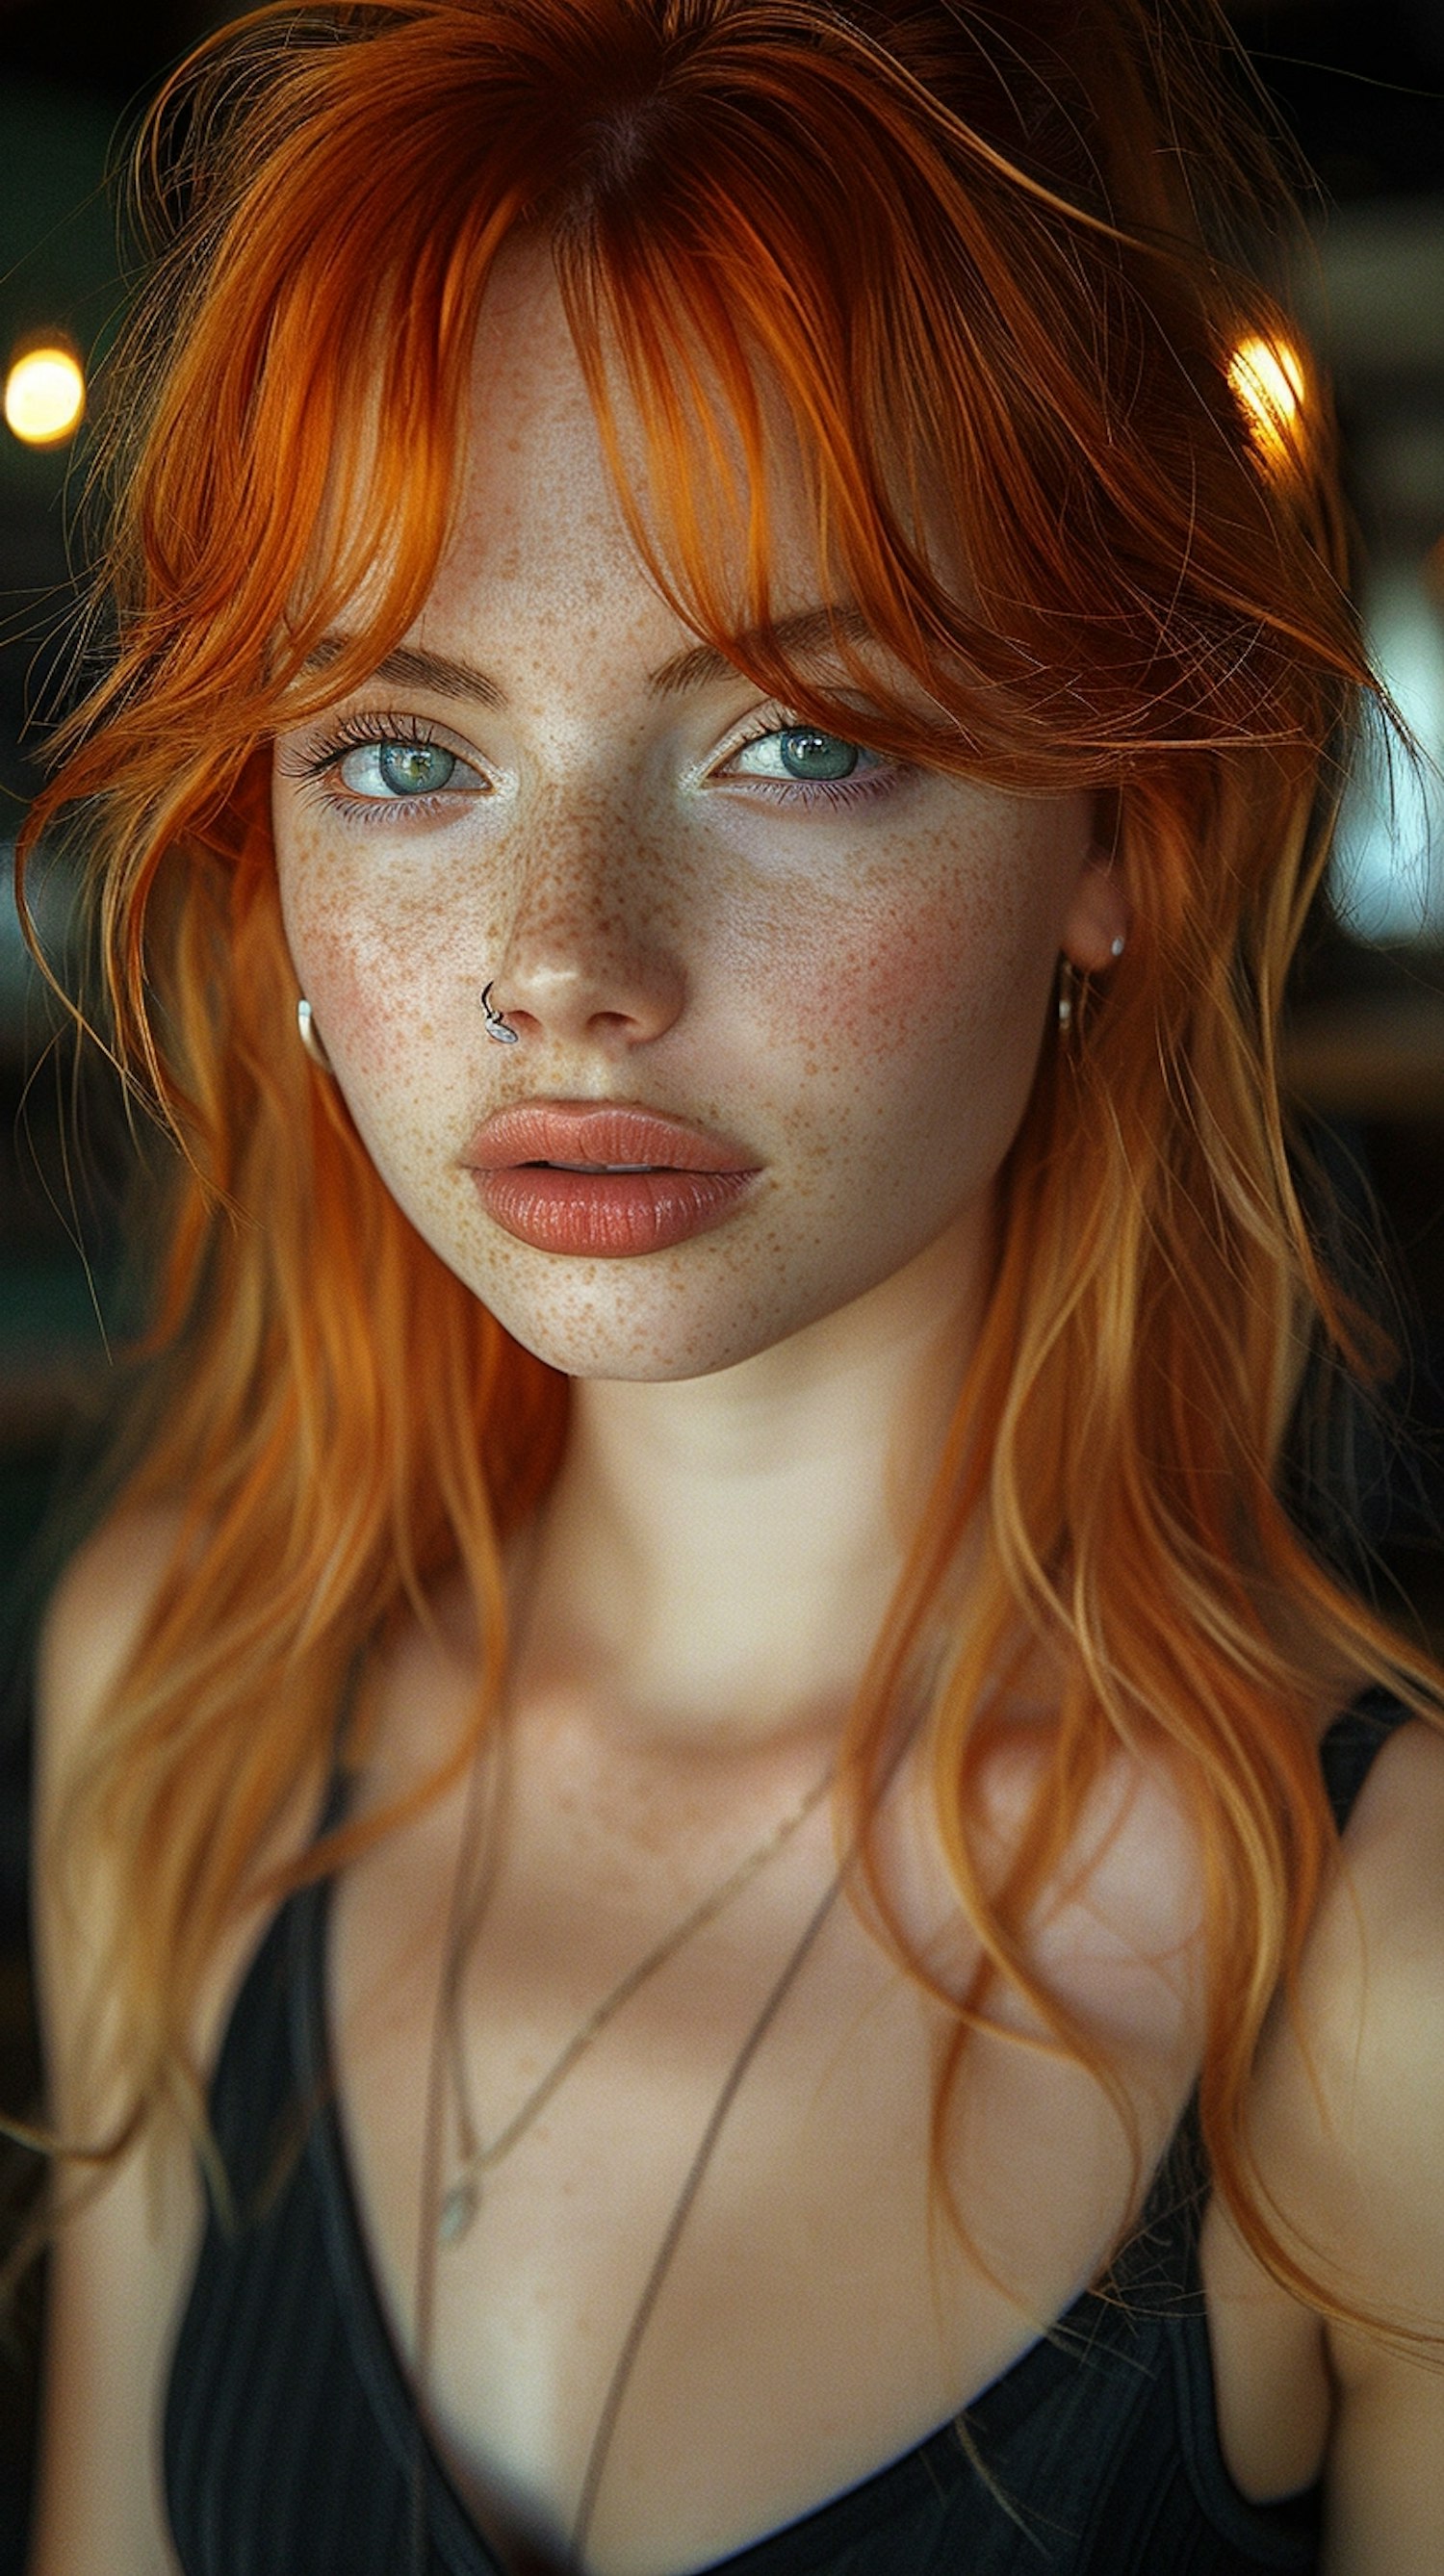 Portrait of a Young Woman with Orange-Red Hair